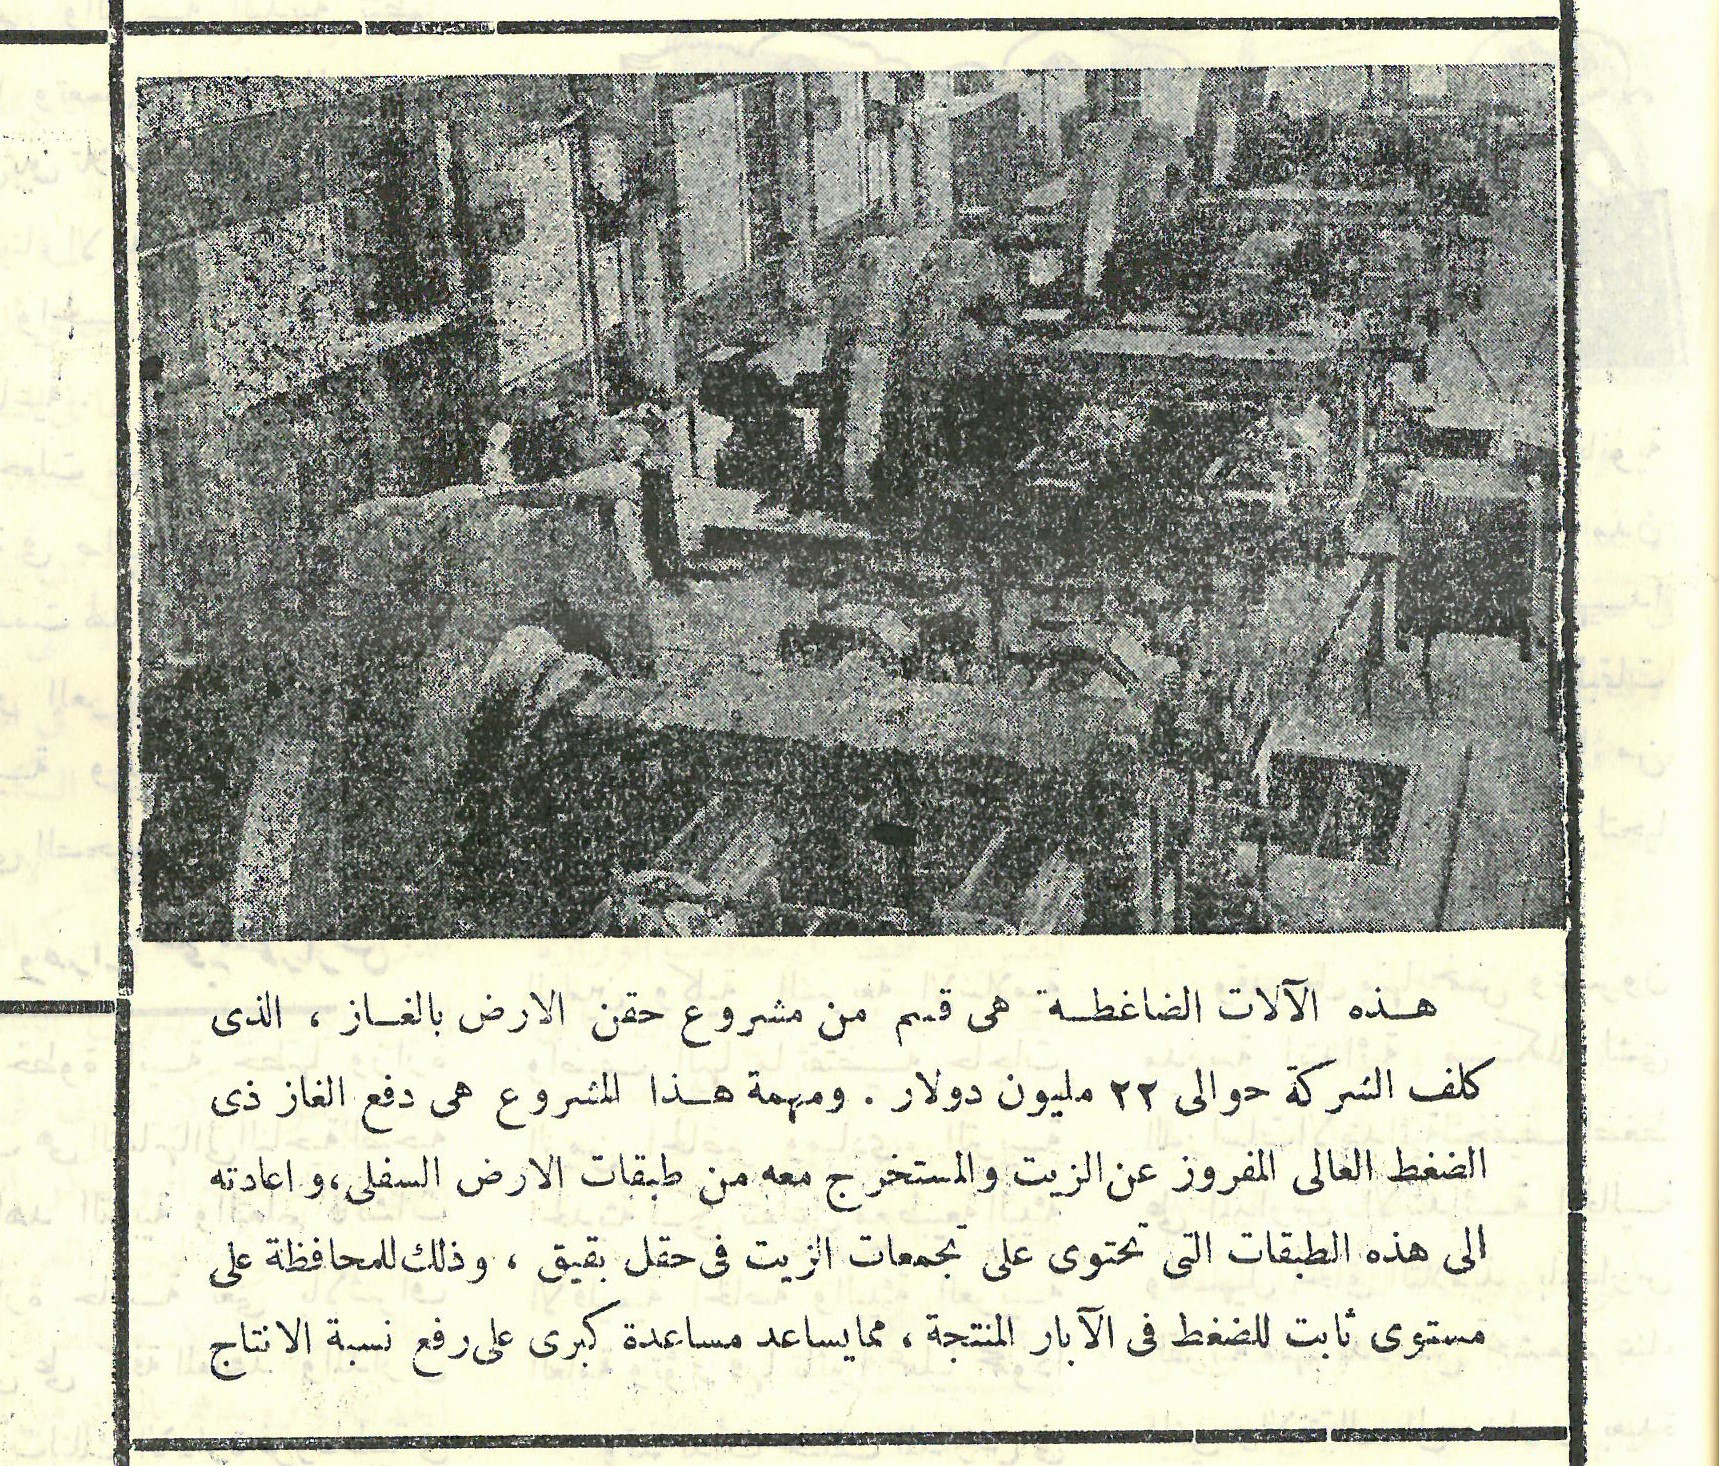 The project of gas in 1954